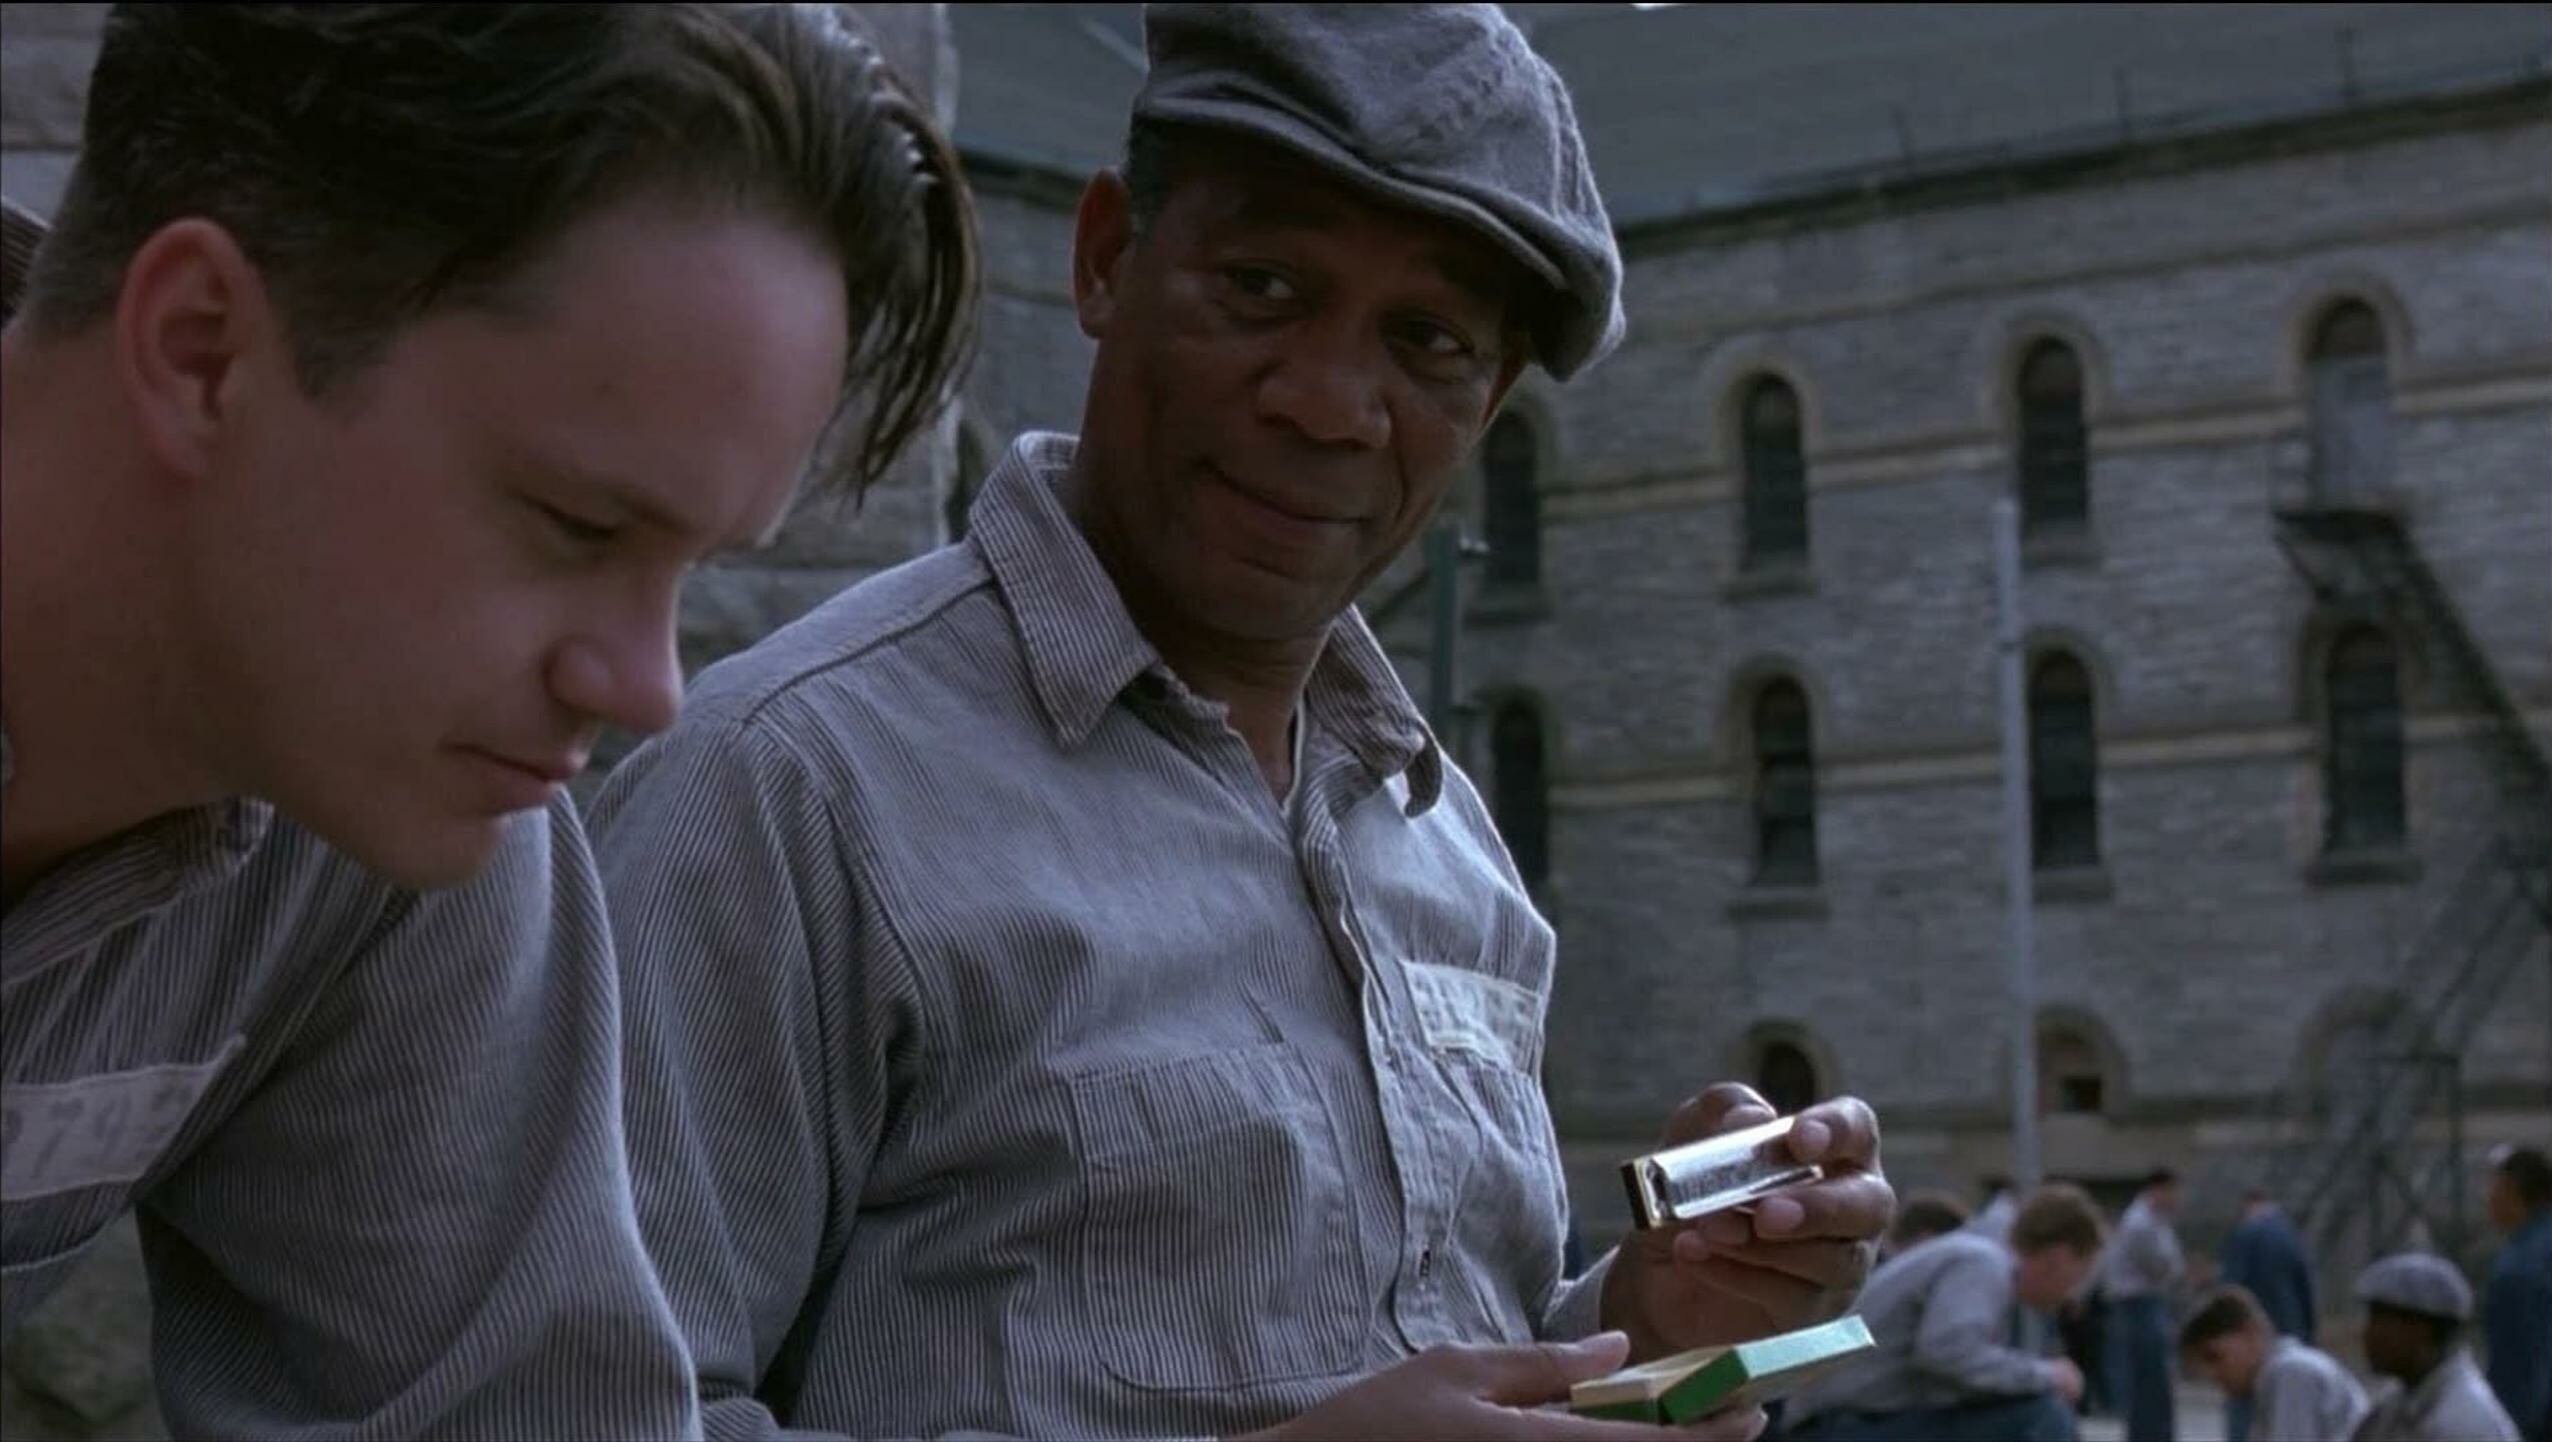 The Shawshank Redemption: The film tells the story of Andy Dufresne, a banker who spends 19 years in Shawshank State Prison. 2560x1450 HD Background.